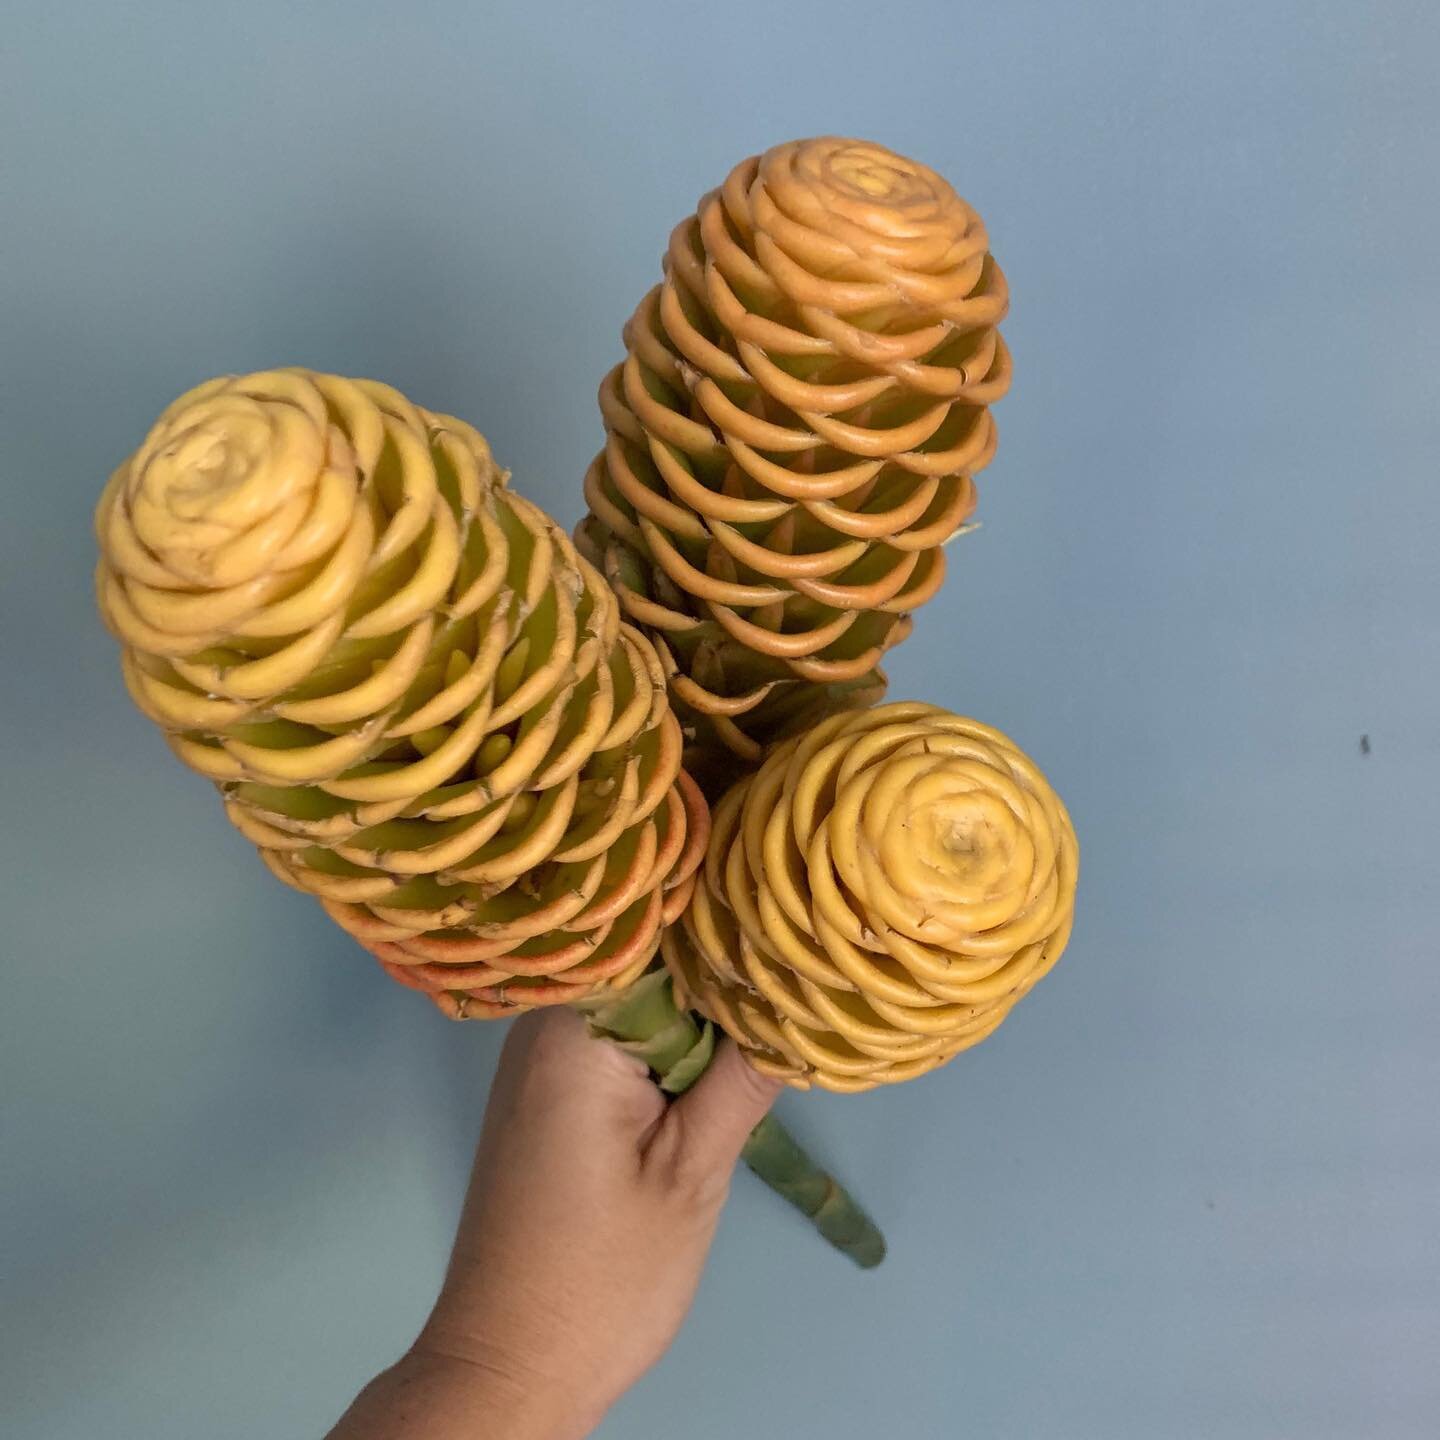 Let&rsquo;s have some fun and start a #flowerfriday and learn about flowers!This is called Beehive Ginger! It&rsquo; an ornamental ginger that is Native to Thailand. These tropical beauties come in this golden yellow, pink and red! They also have the